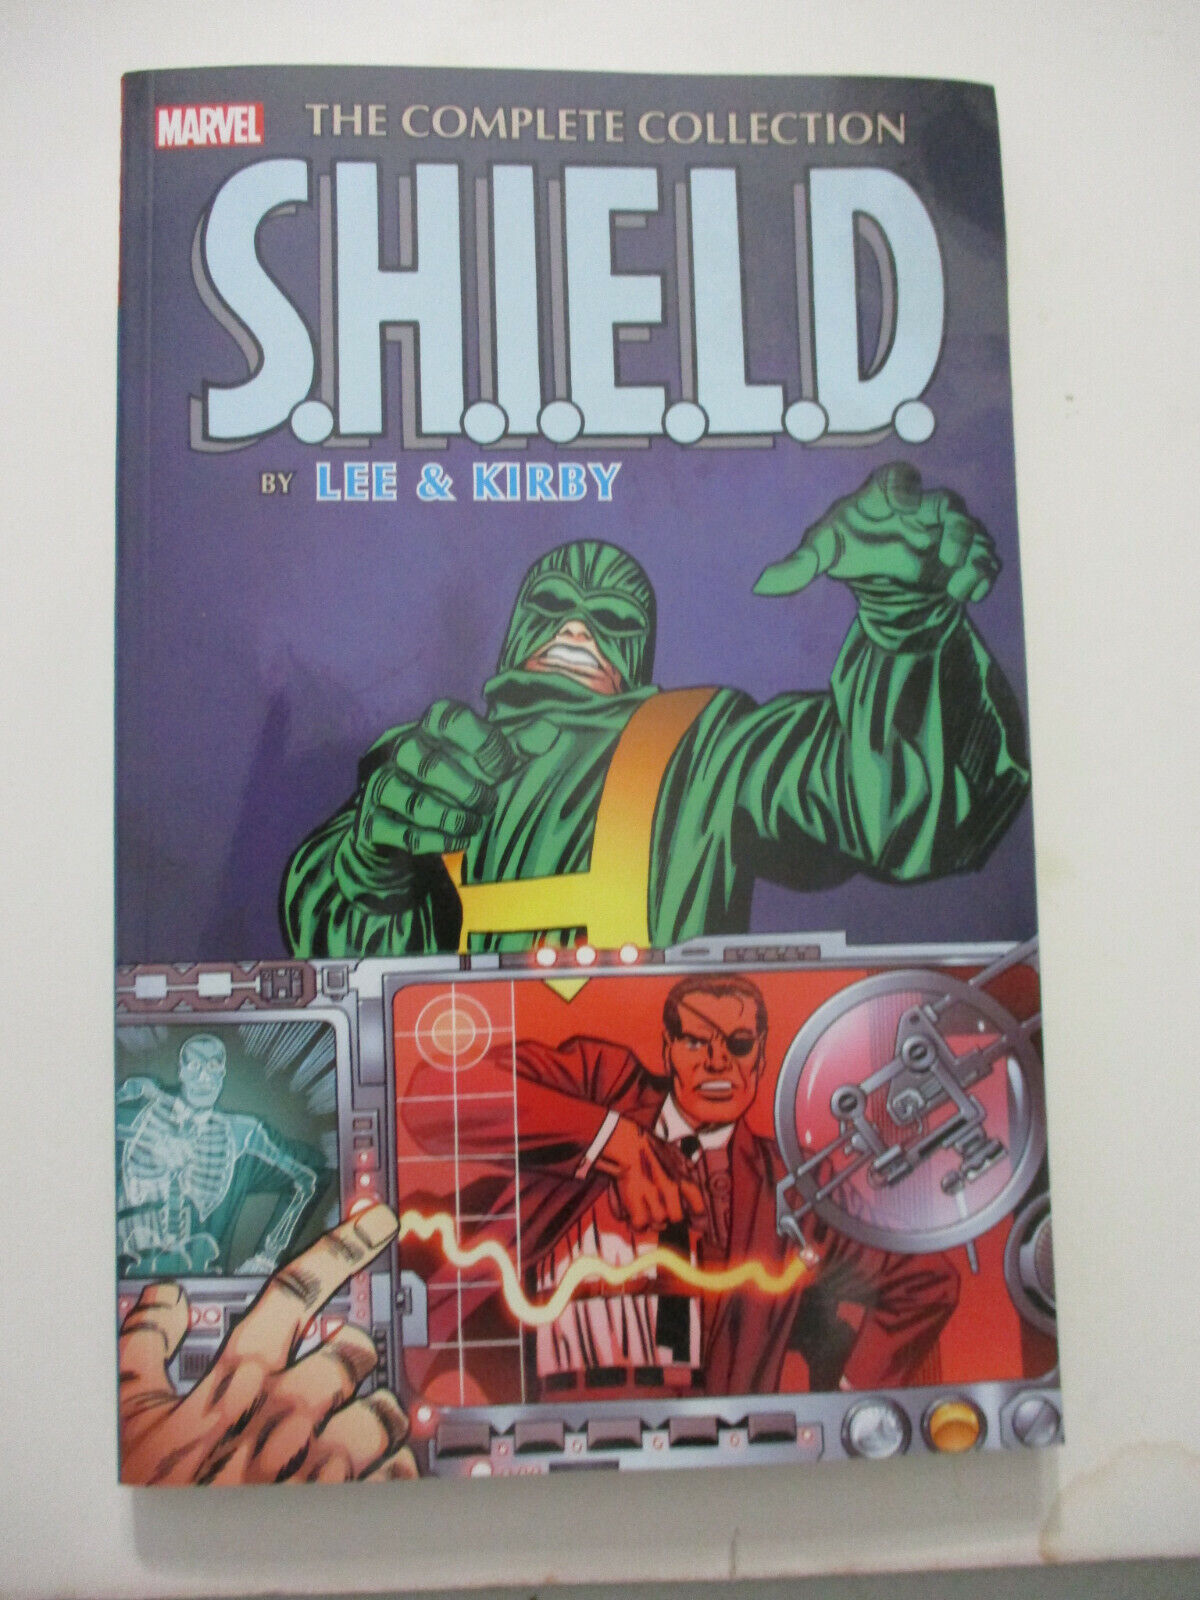 Stan Lee Jack Kirby S. H. I. E. L. D. Marvel Complete Collection Hydra Shield